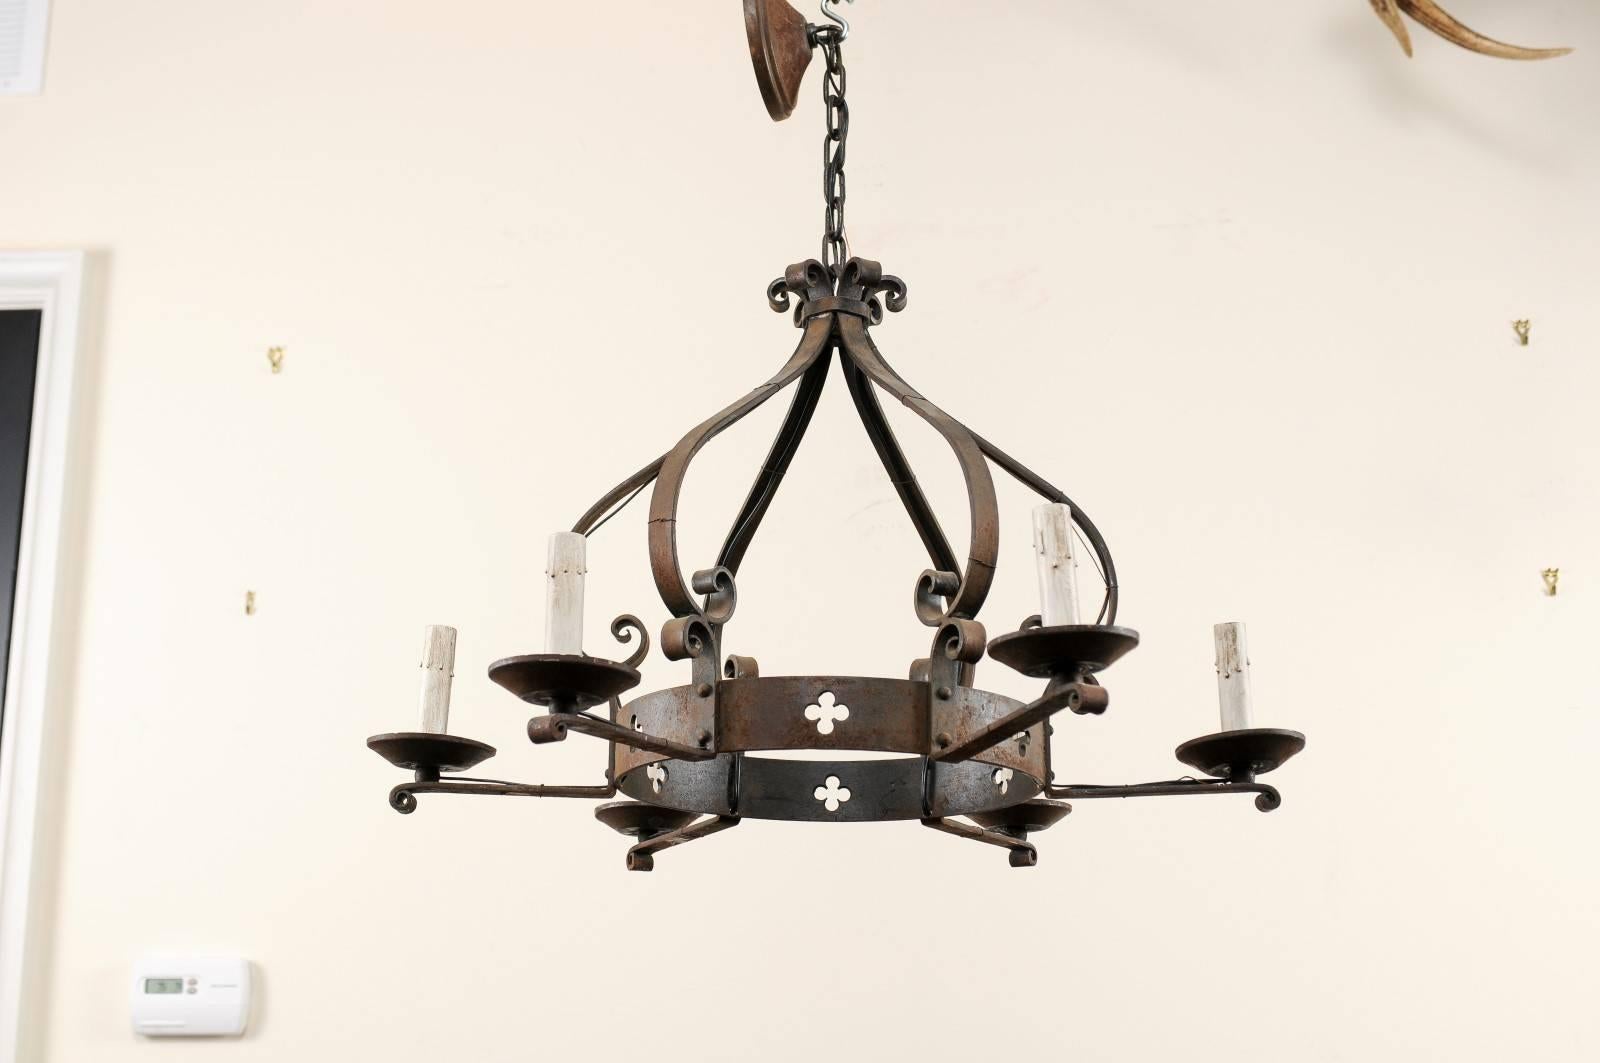 French Vintage Iron Chandelier with Crown Shape & Pierced Clover / Trefoil Decor 2